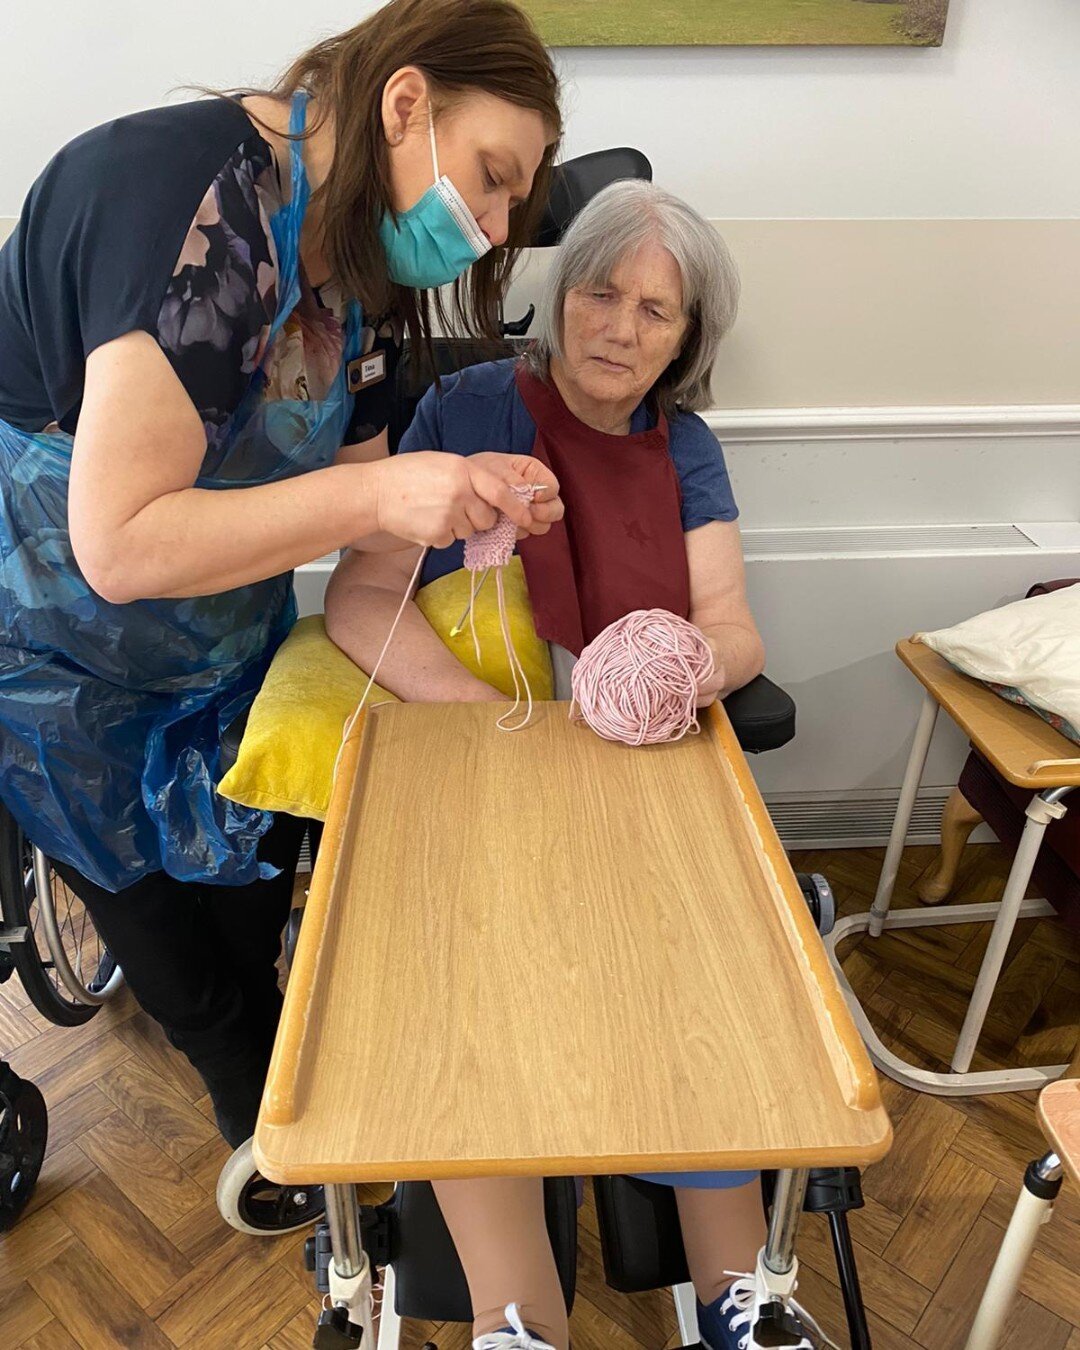 We host a variety of activities for our residents, ranging from fun days out on our minibus to creative activities like knitting or crafting. This helps both physical, social and cognitive wellbeing.

#ChegworthNursingHome #LondonCareHome #SouthLondo